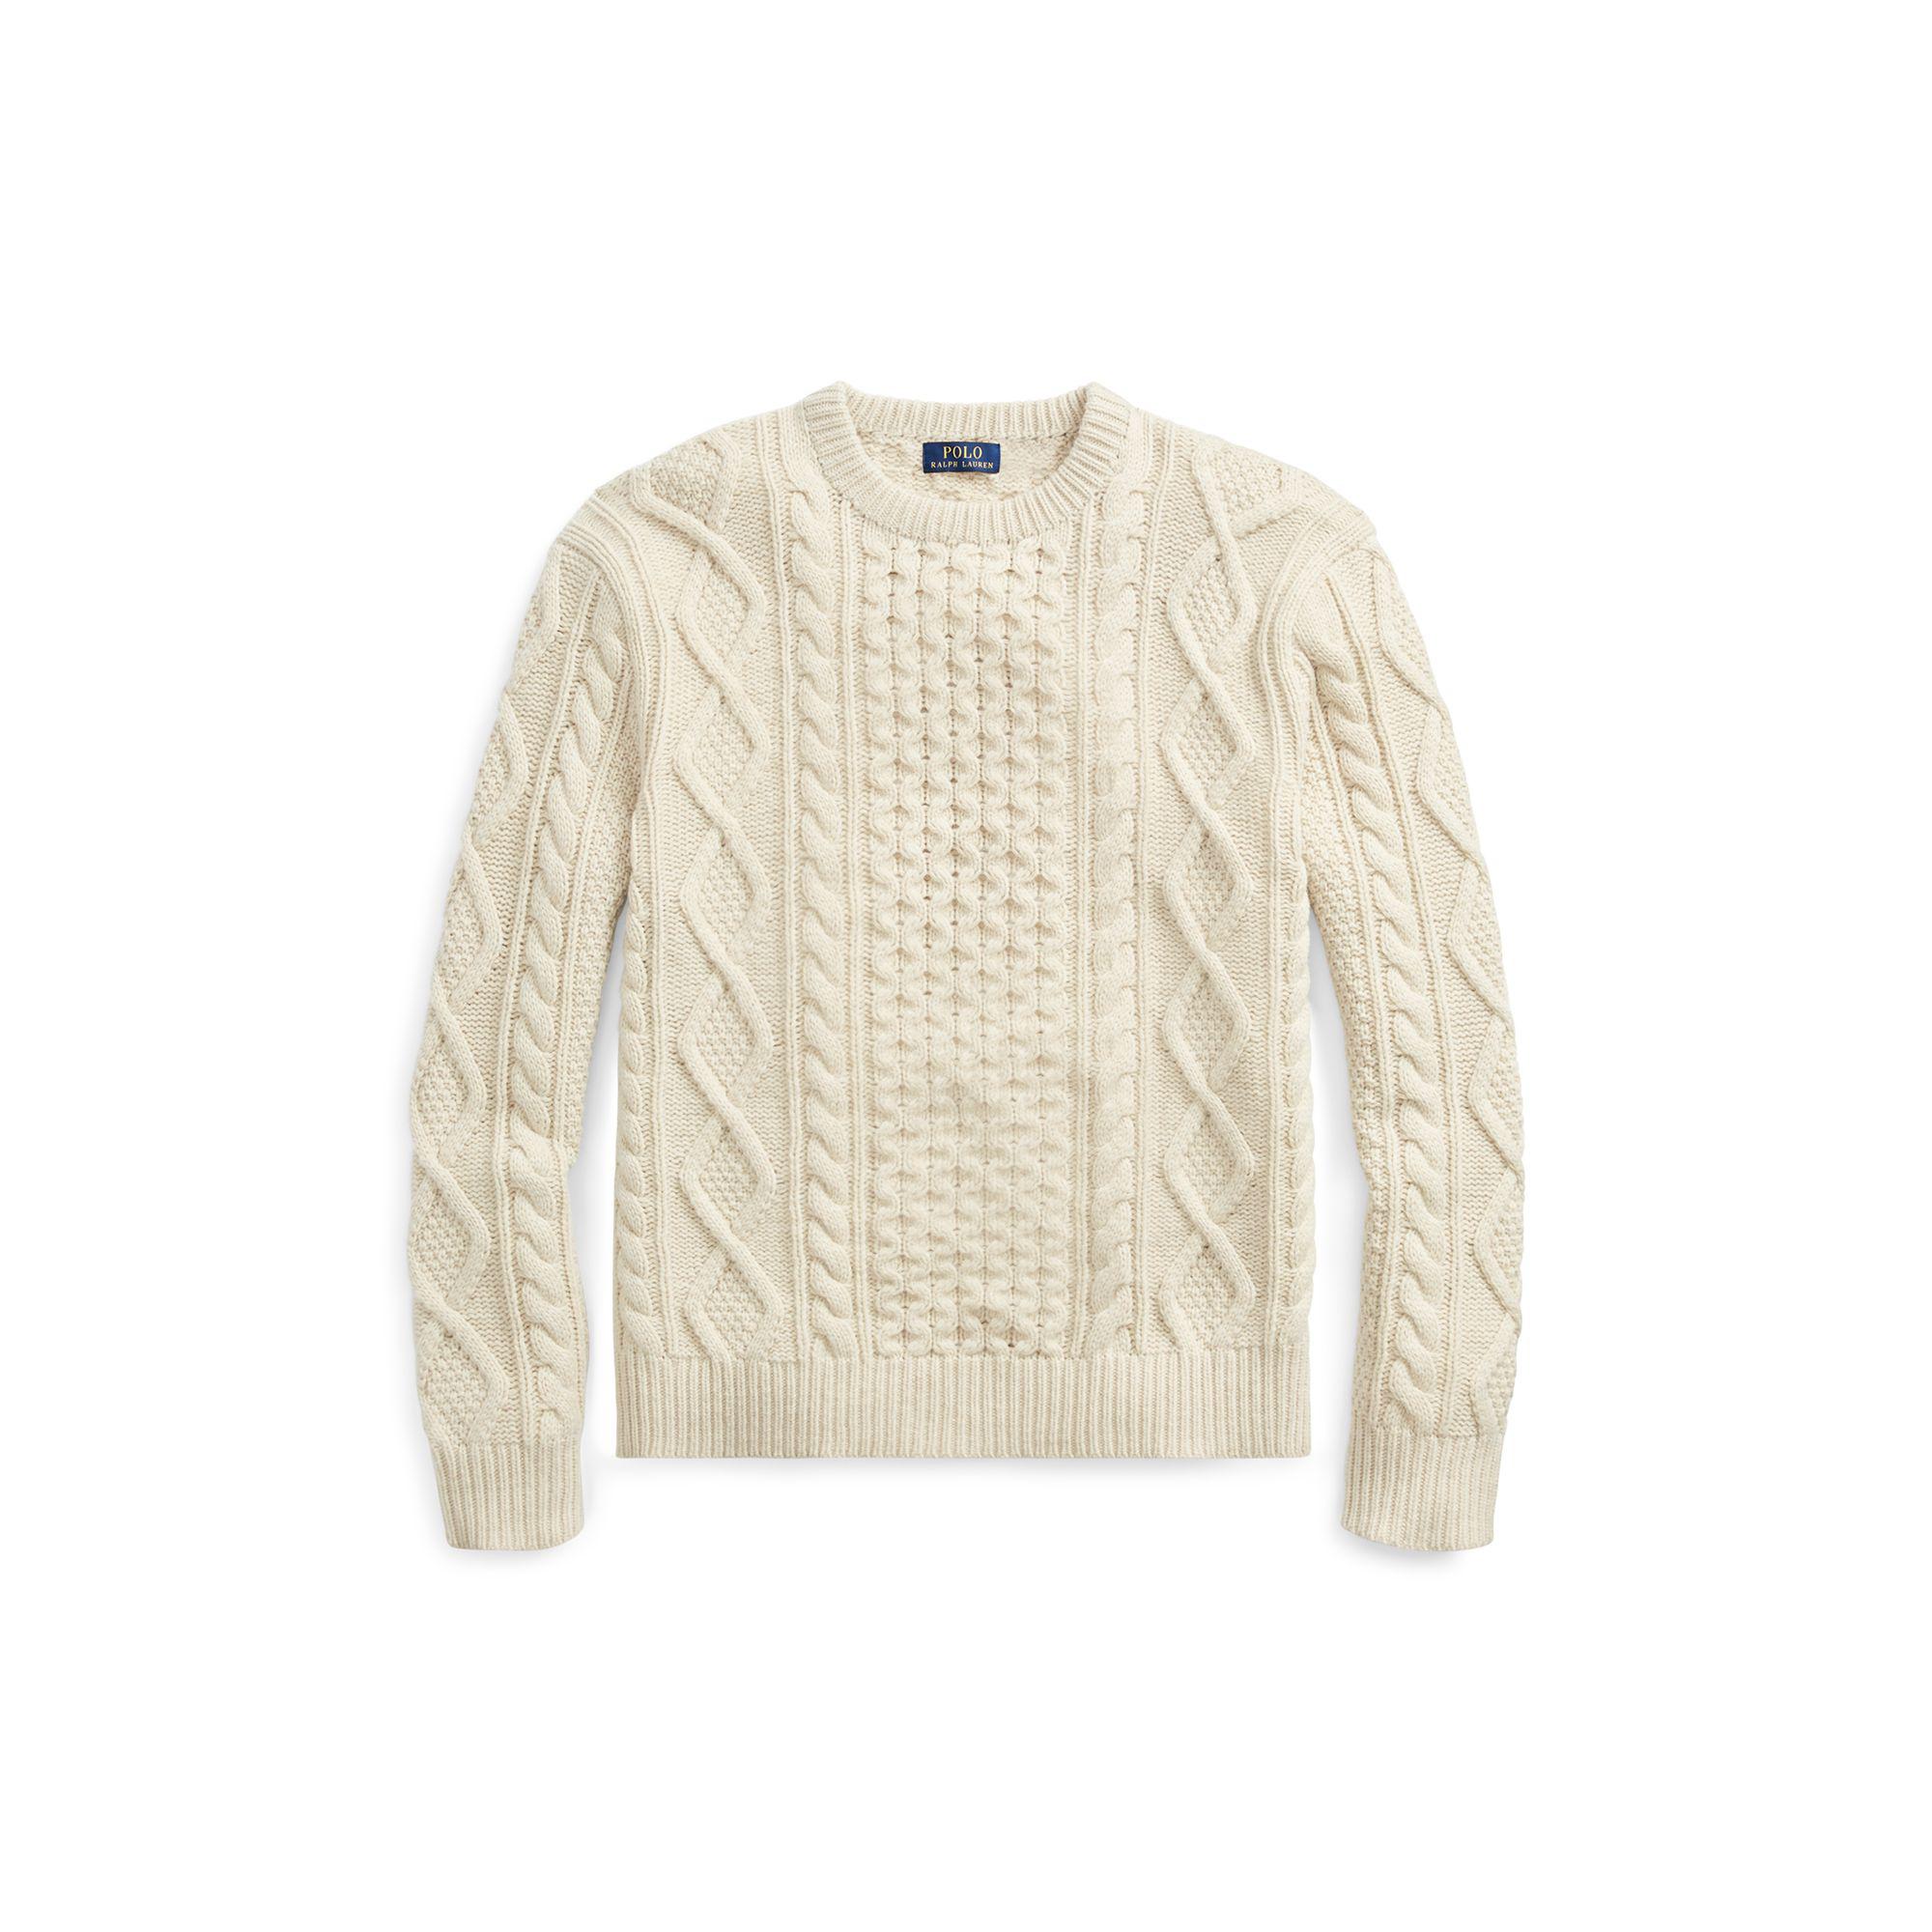 Polo Ralph Lauren Iconic Fisherman's Sweater in Natural for Men - Lyst